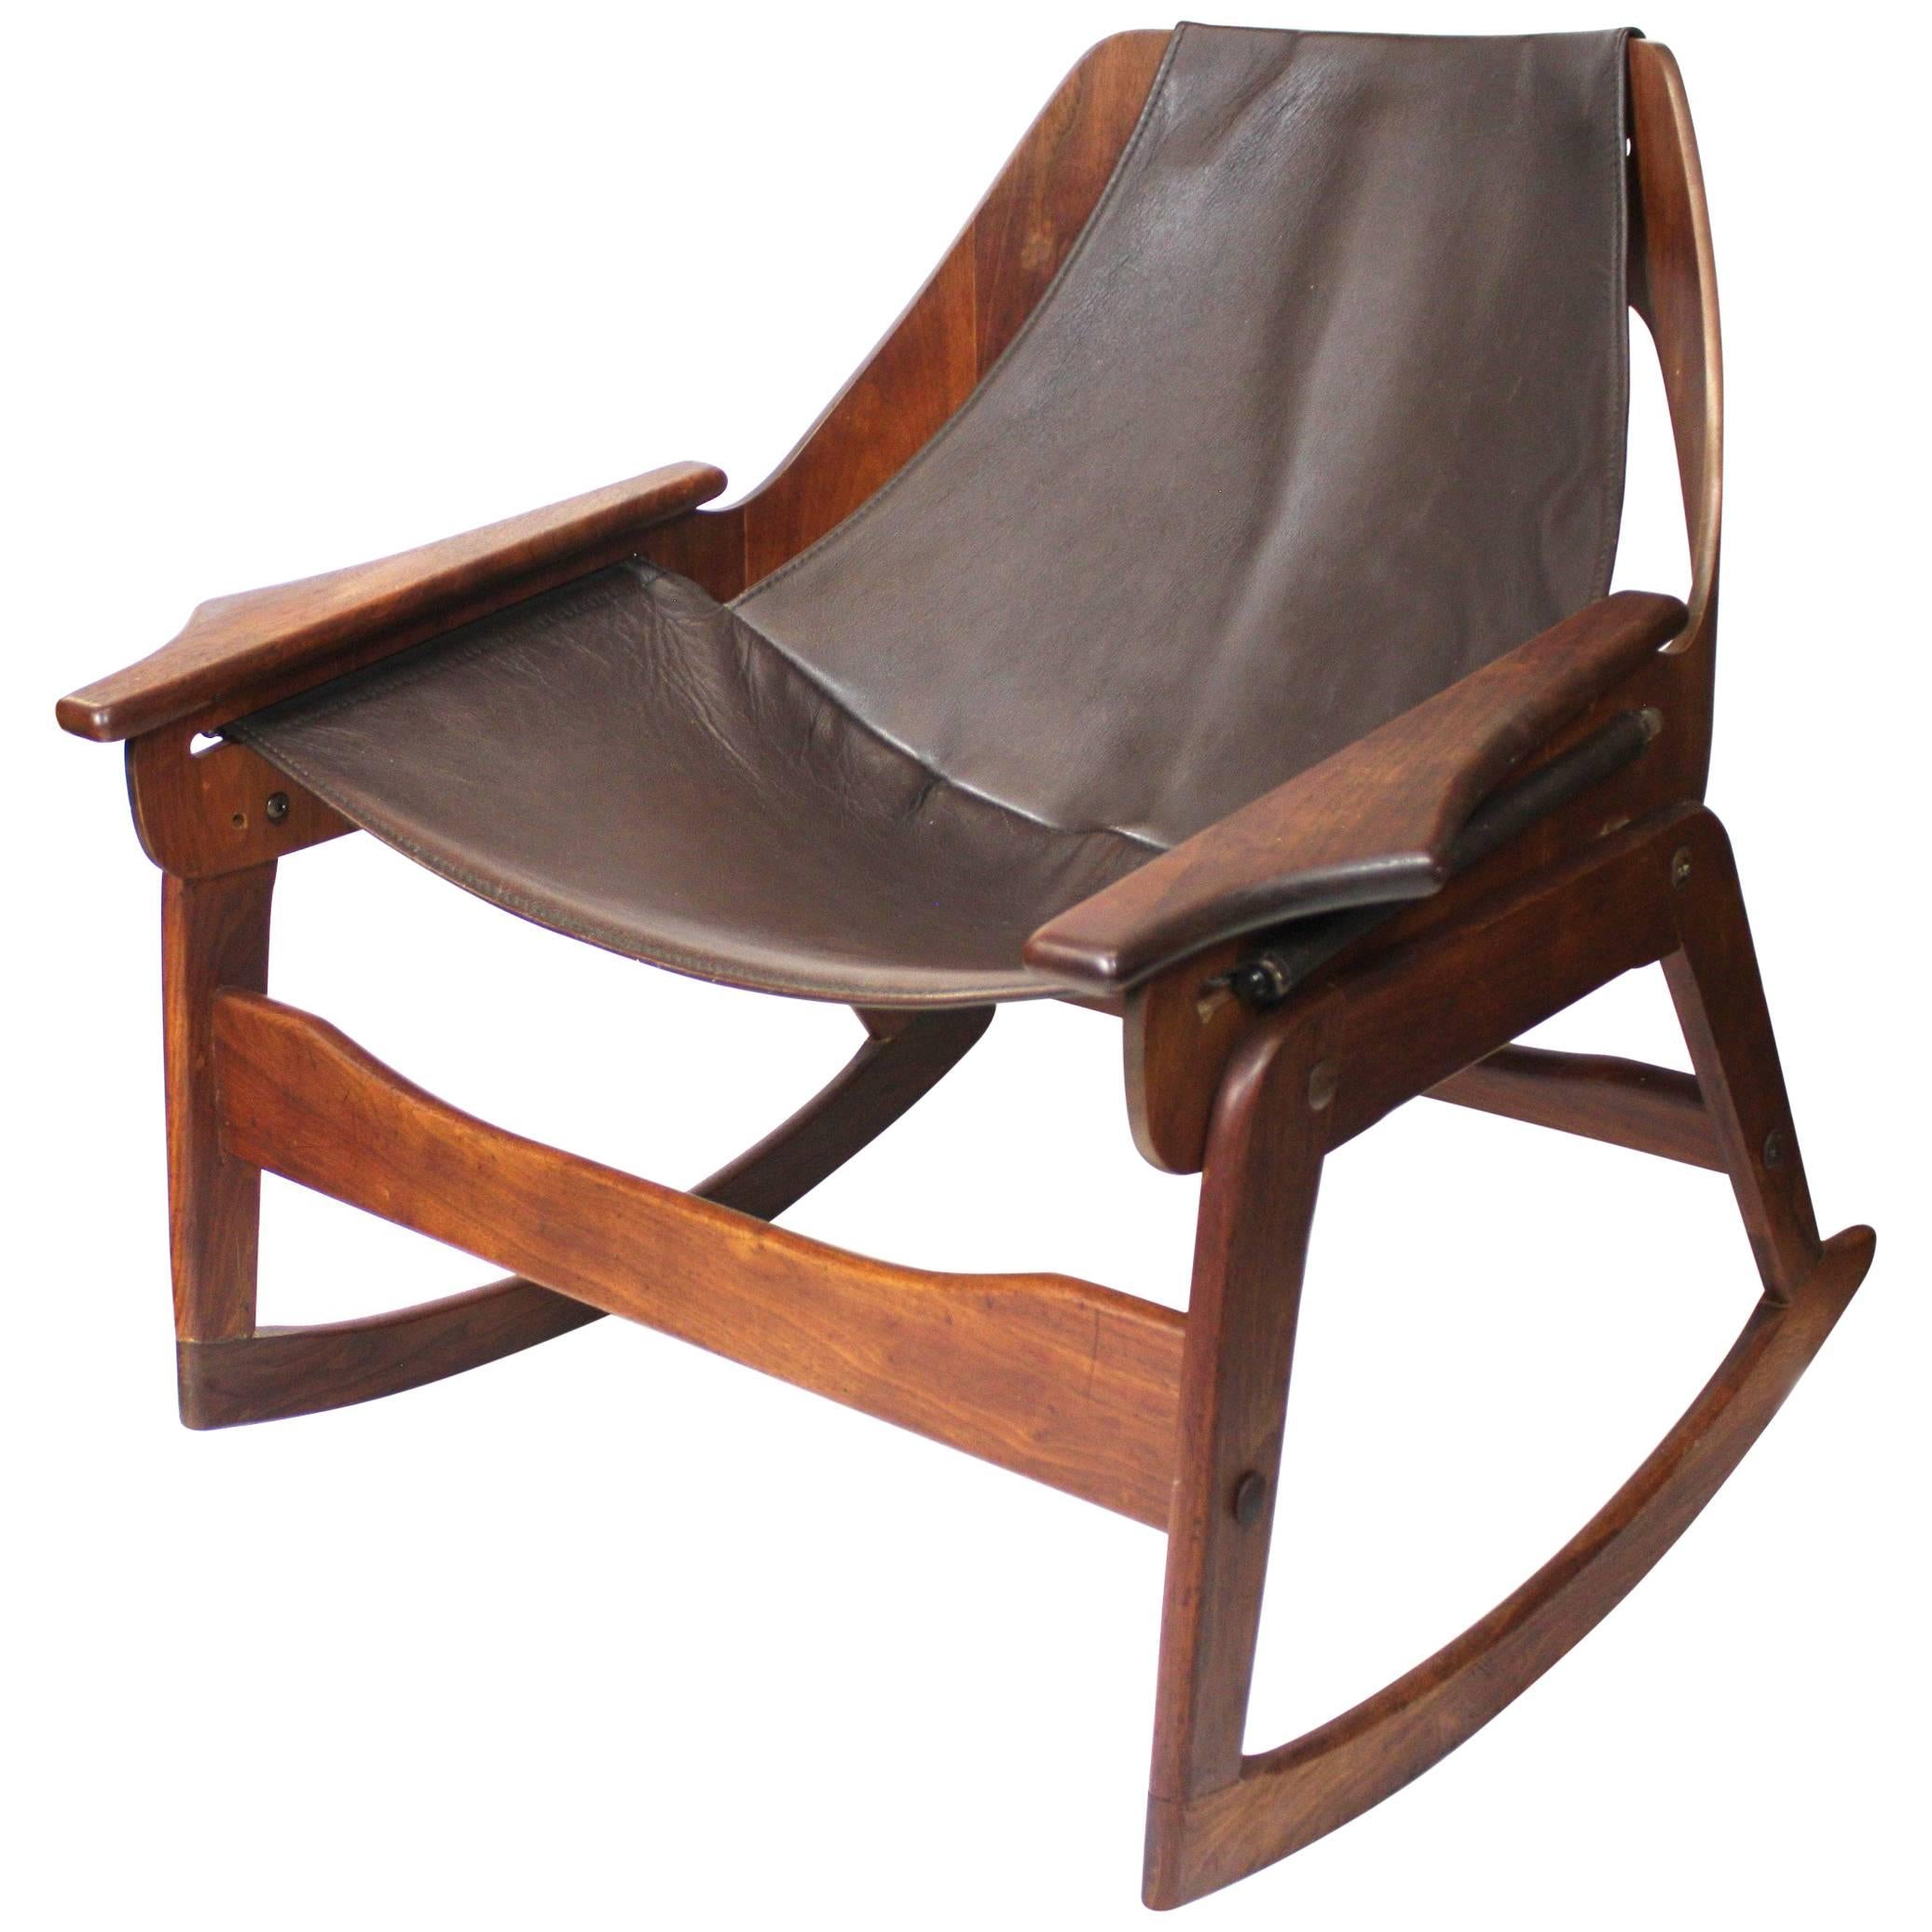 Mid-Century Modern Bent Plywood Leather Sling Rocking Chair by Jerry Johnson